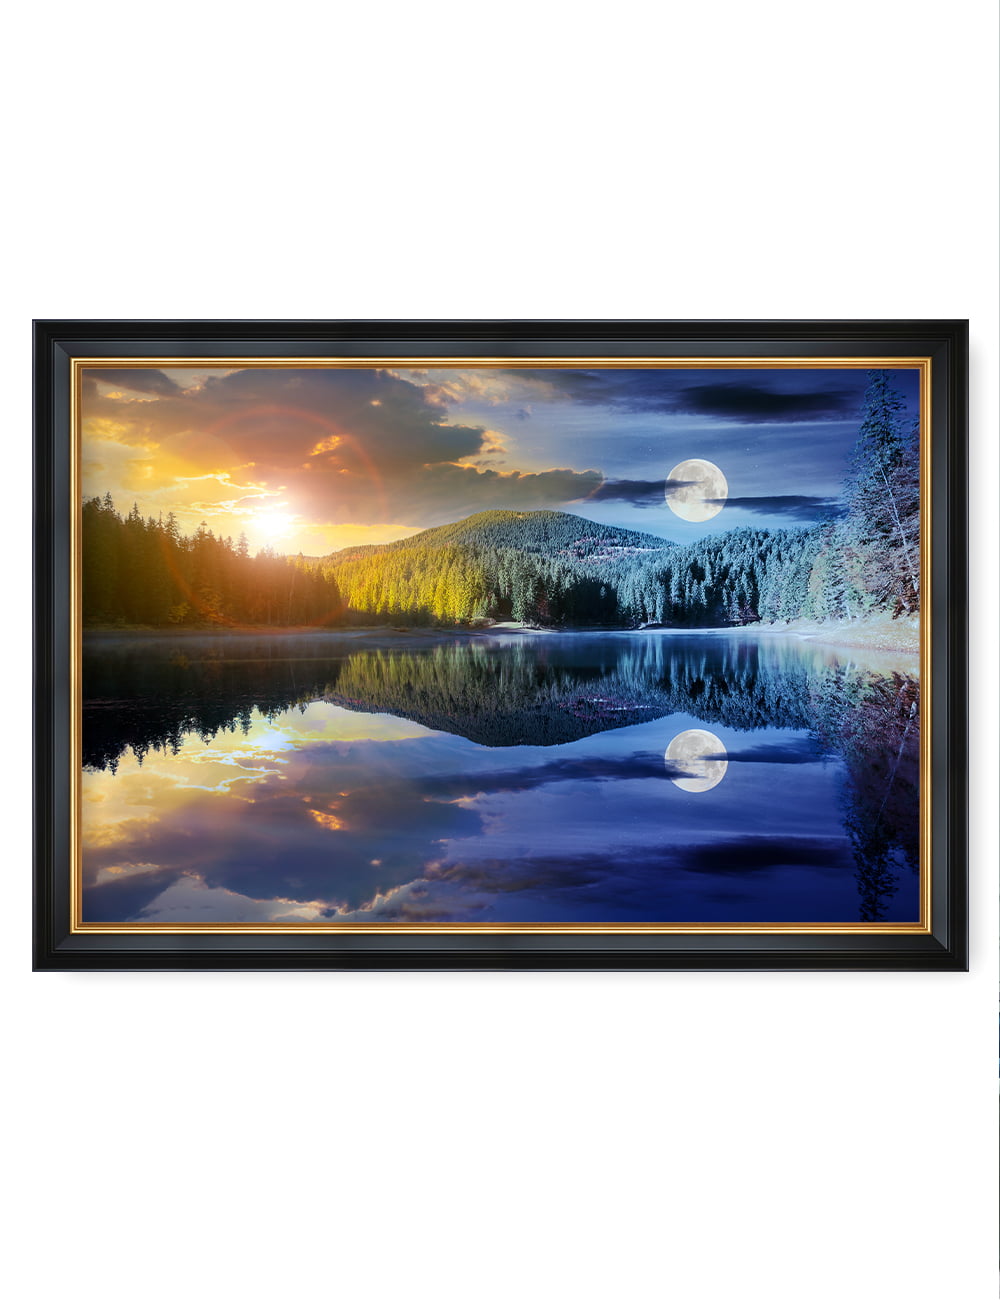 DecorArts Sun and and night lakeview, Giclee Print on Acid  Free Cotton Canvas with Matching Classical Solid Wood Frame. Total Size  w/Frame: 39.25x27.25